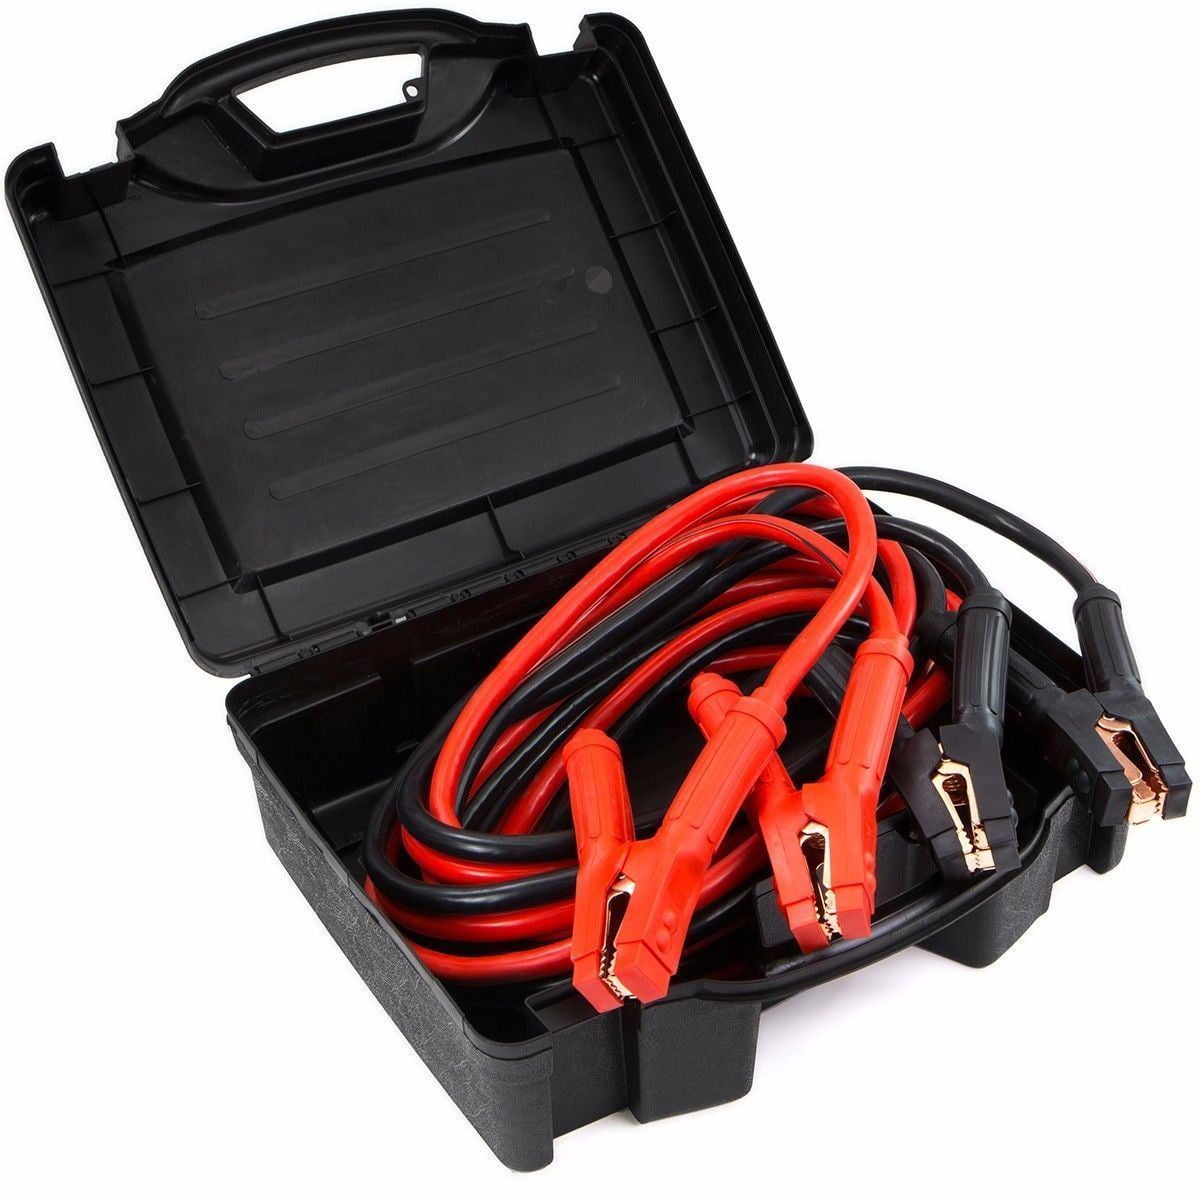 Heavy Duty Jumper Booster Cables Commercial Grade Battery 4 Gauge 10ft 1000 AMP 